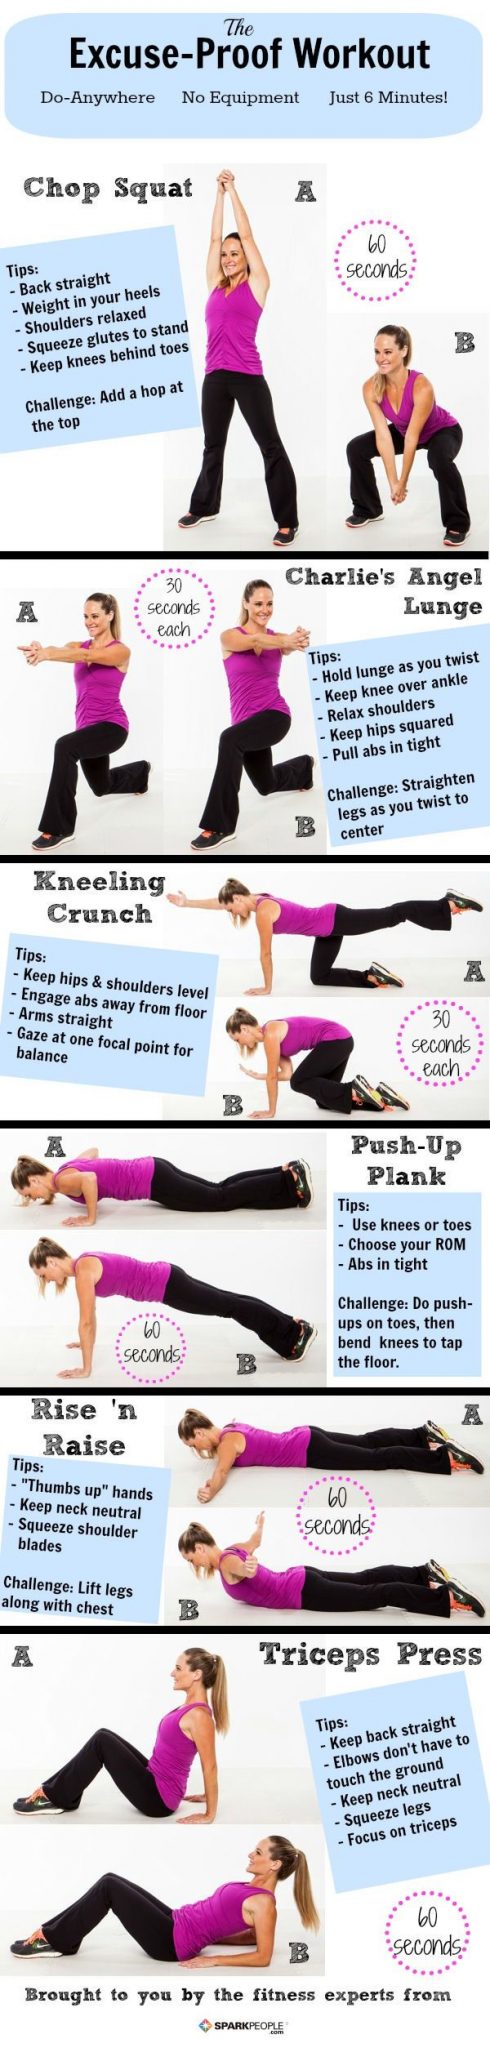 6 Minute Exercise Without Equipment